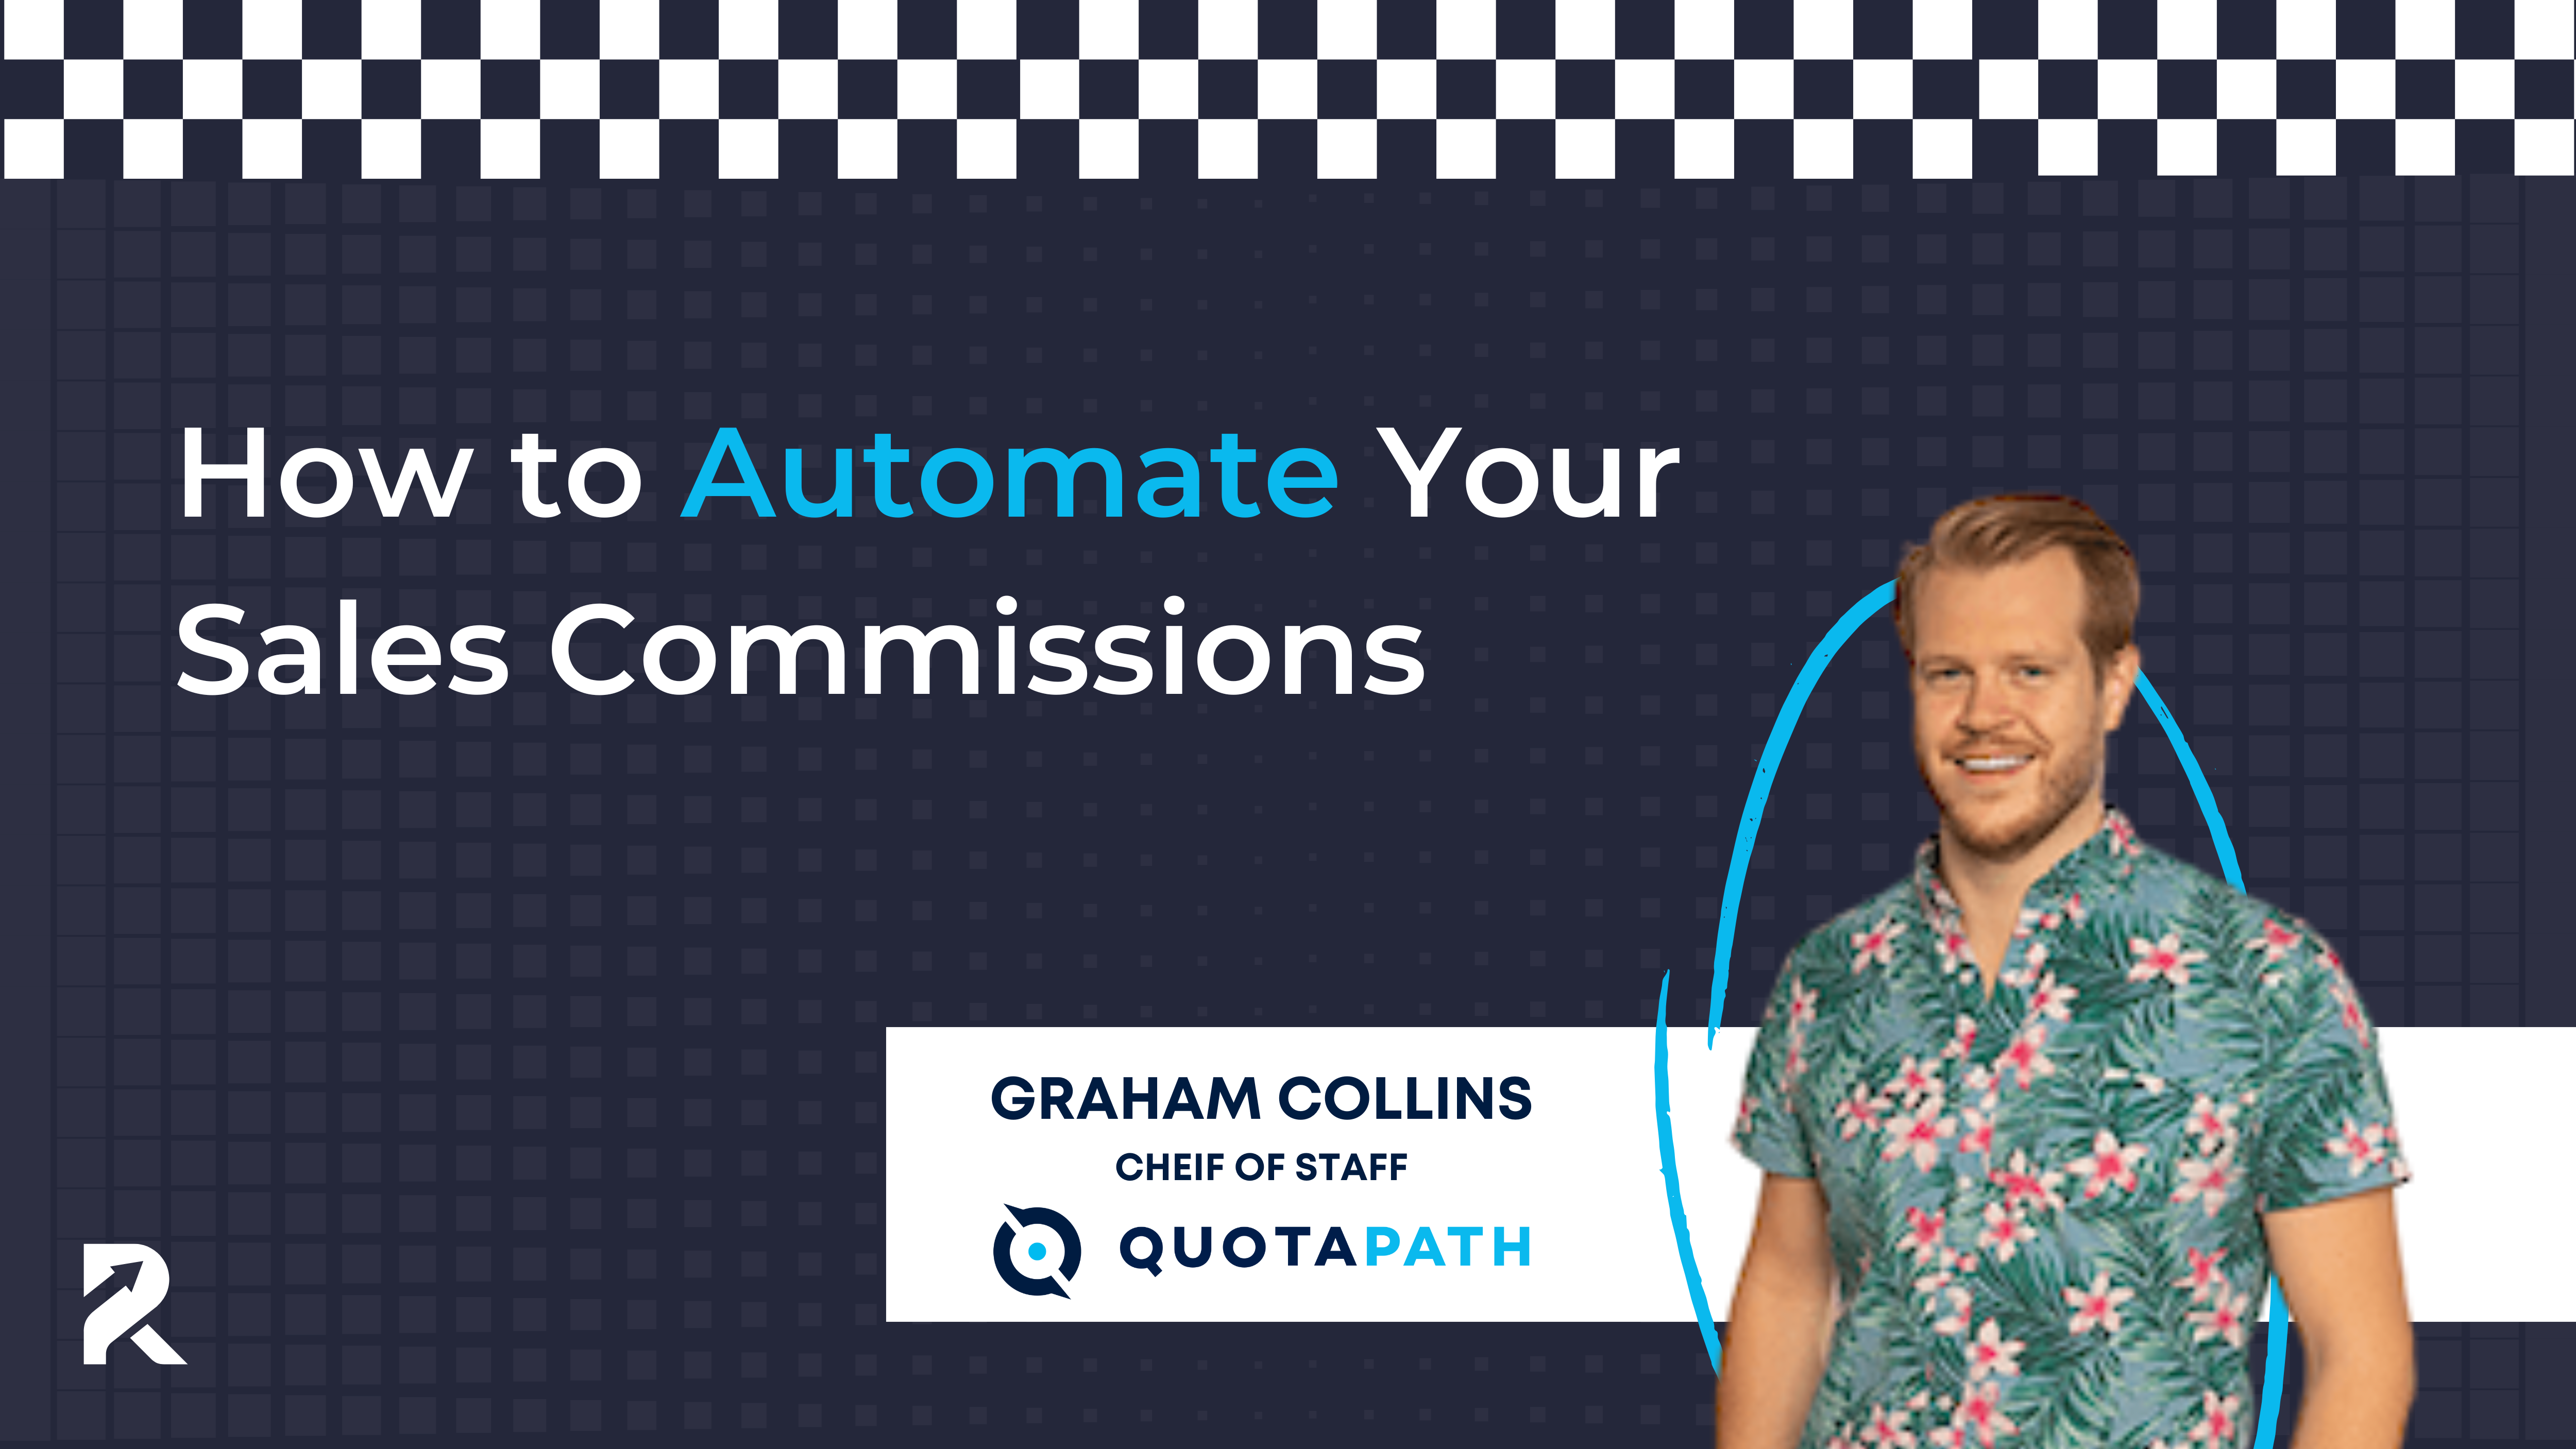 Have You Thought About Automating Sales Commissions?